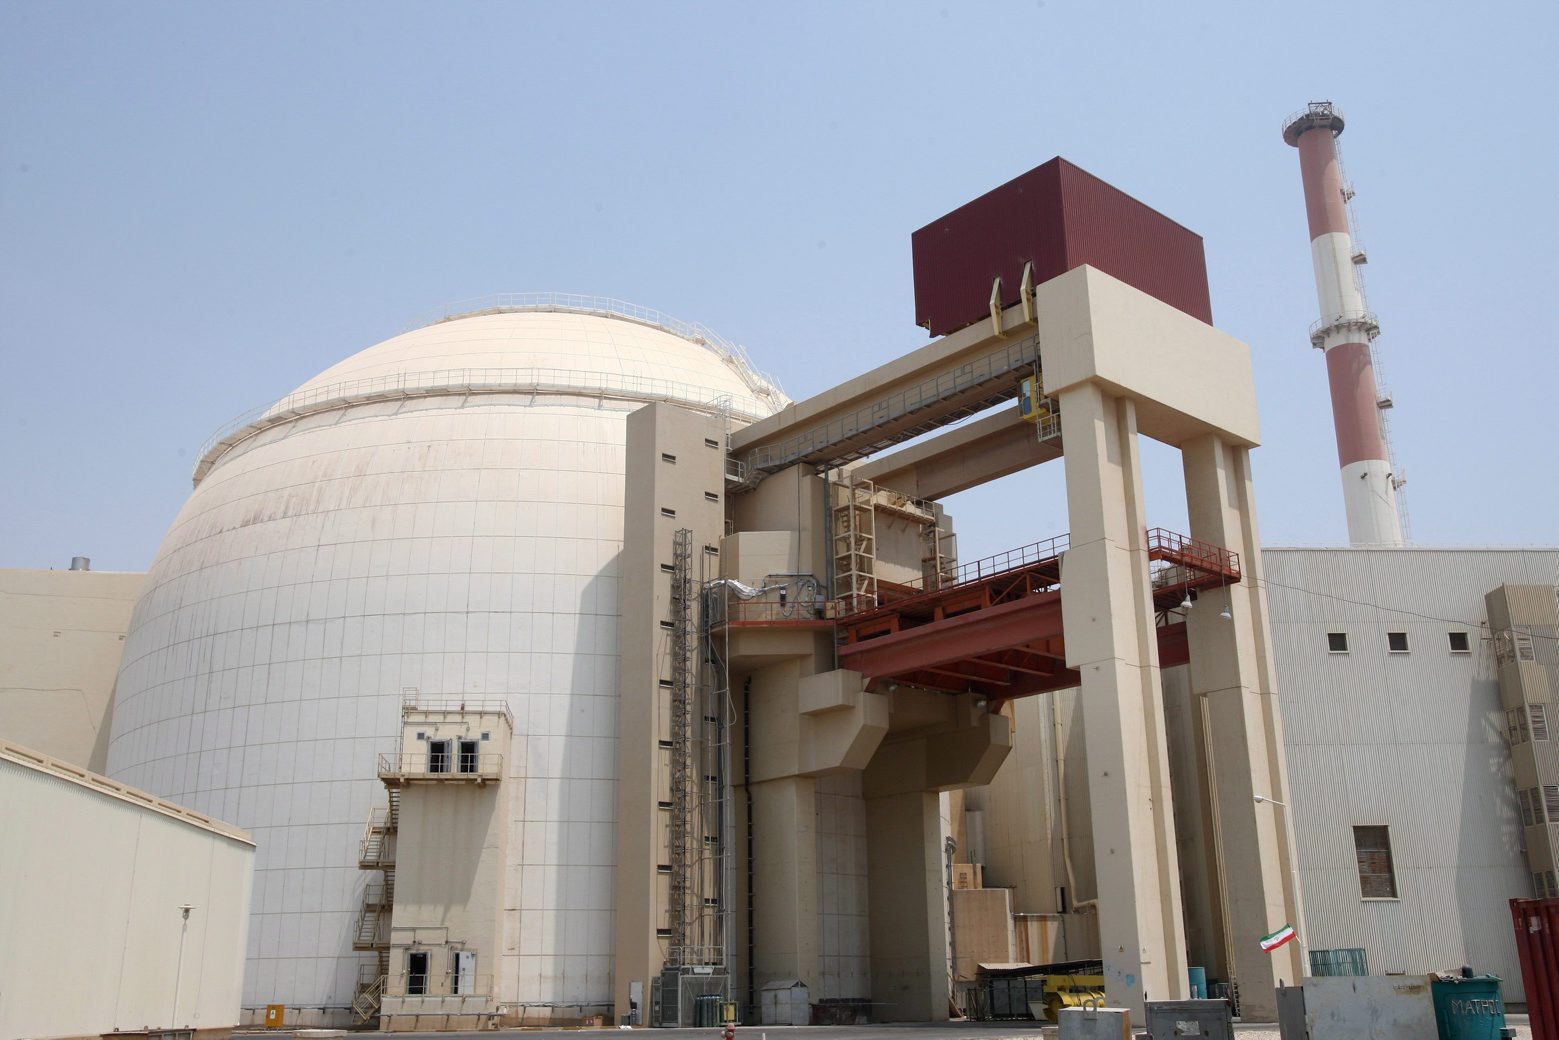 epa07687222 (FILE) - A general view of the Iranian nuclear power plant in Bushehr, southern Iran, 21 August 2010 (reissued 01 July 2019). According to Iranian media on 01 July 2019, Iran has passed the limit on its stockpile of low-enriched uranium by exceeding of 300kg that was set in a landmark 2015 nuclear deal made with world powers. The International Atomic Energy Agency (IAEA) said it will file a report.  EPA/ABEDIN TAHERKENAREH (FILE) IRAN NUCLEAR DEAL ENRICHED URANIUM